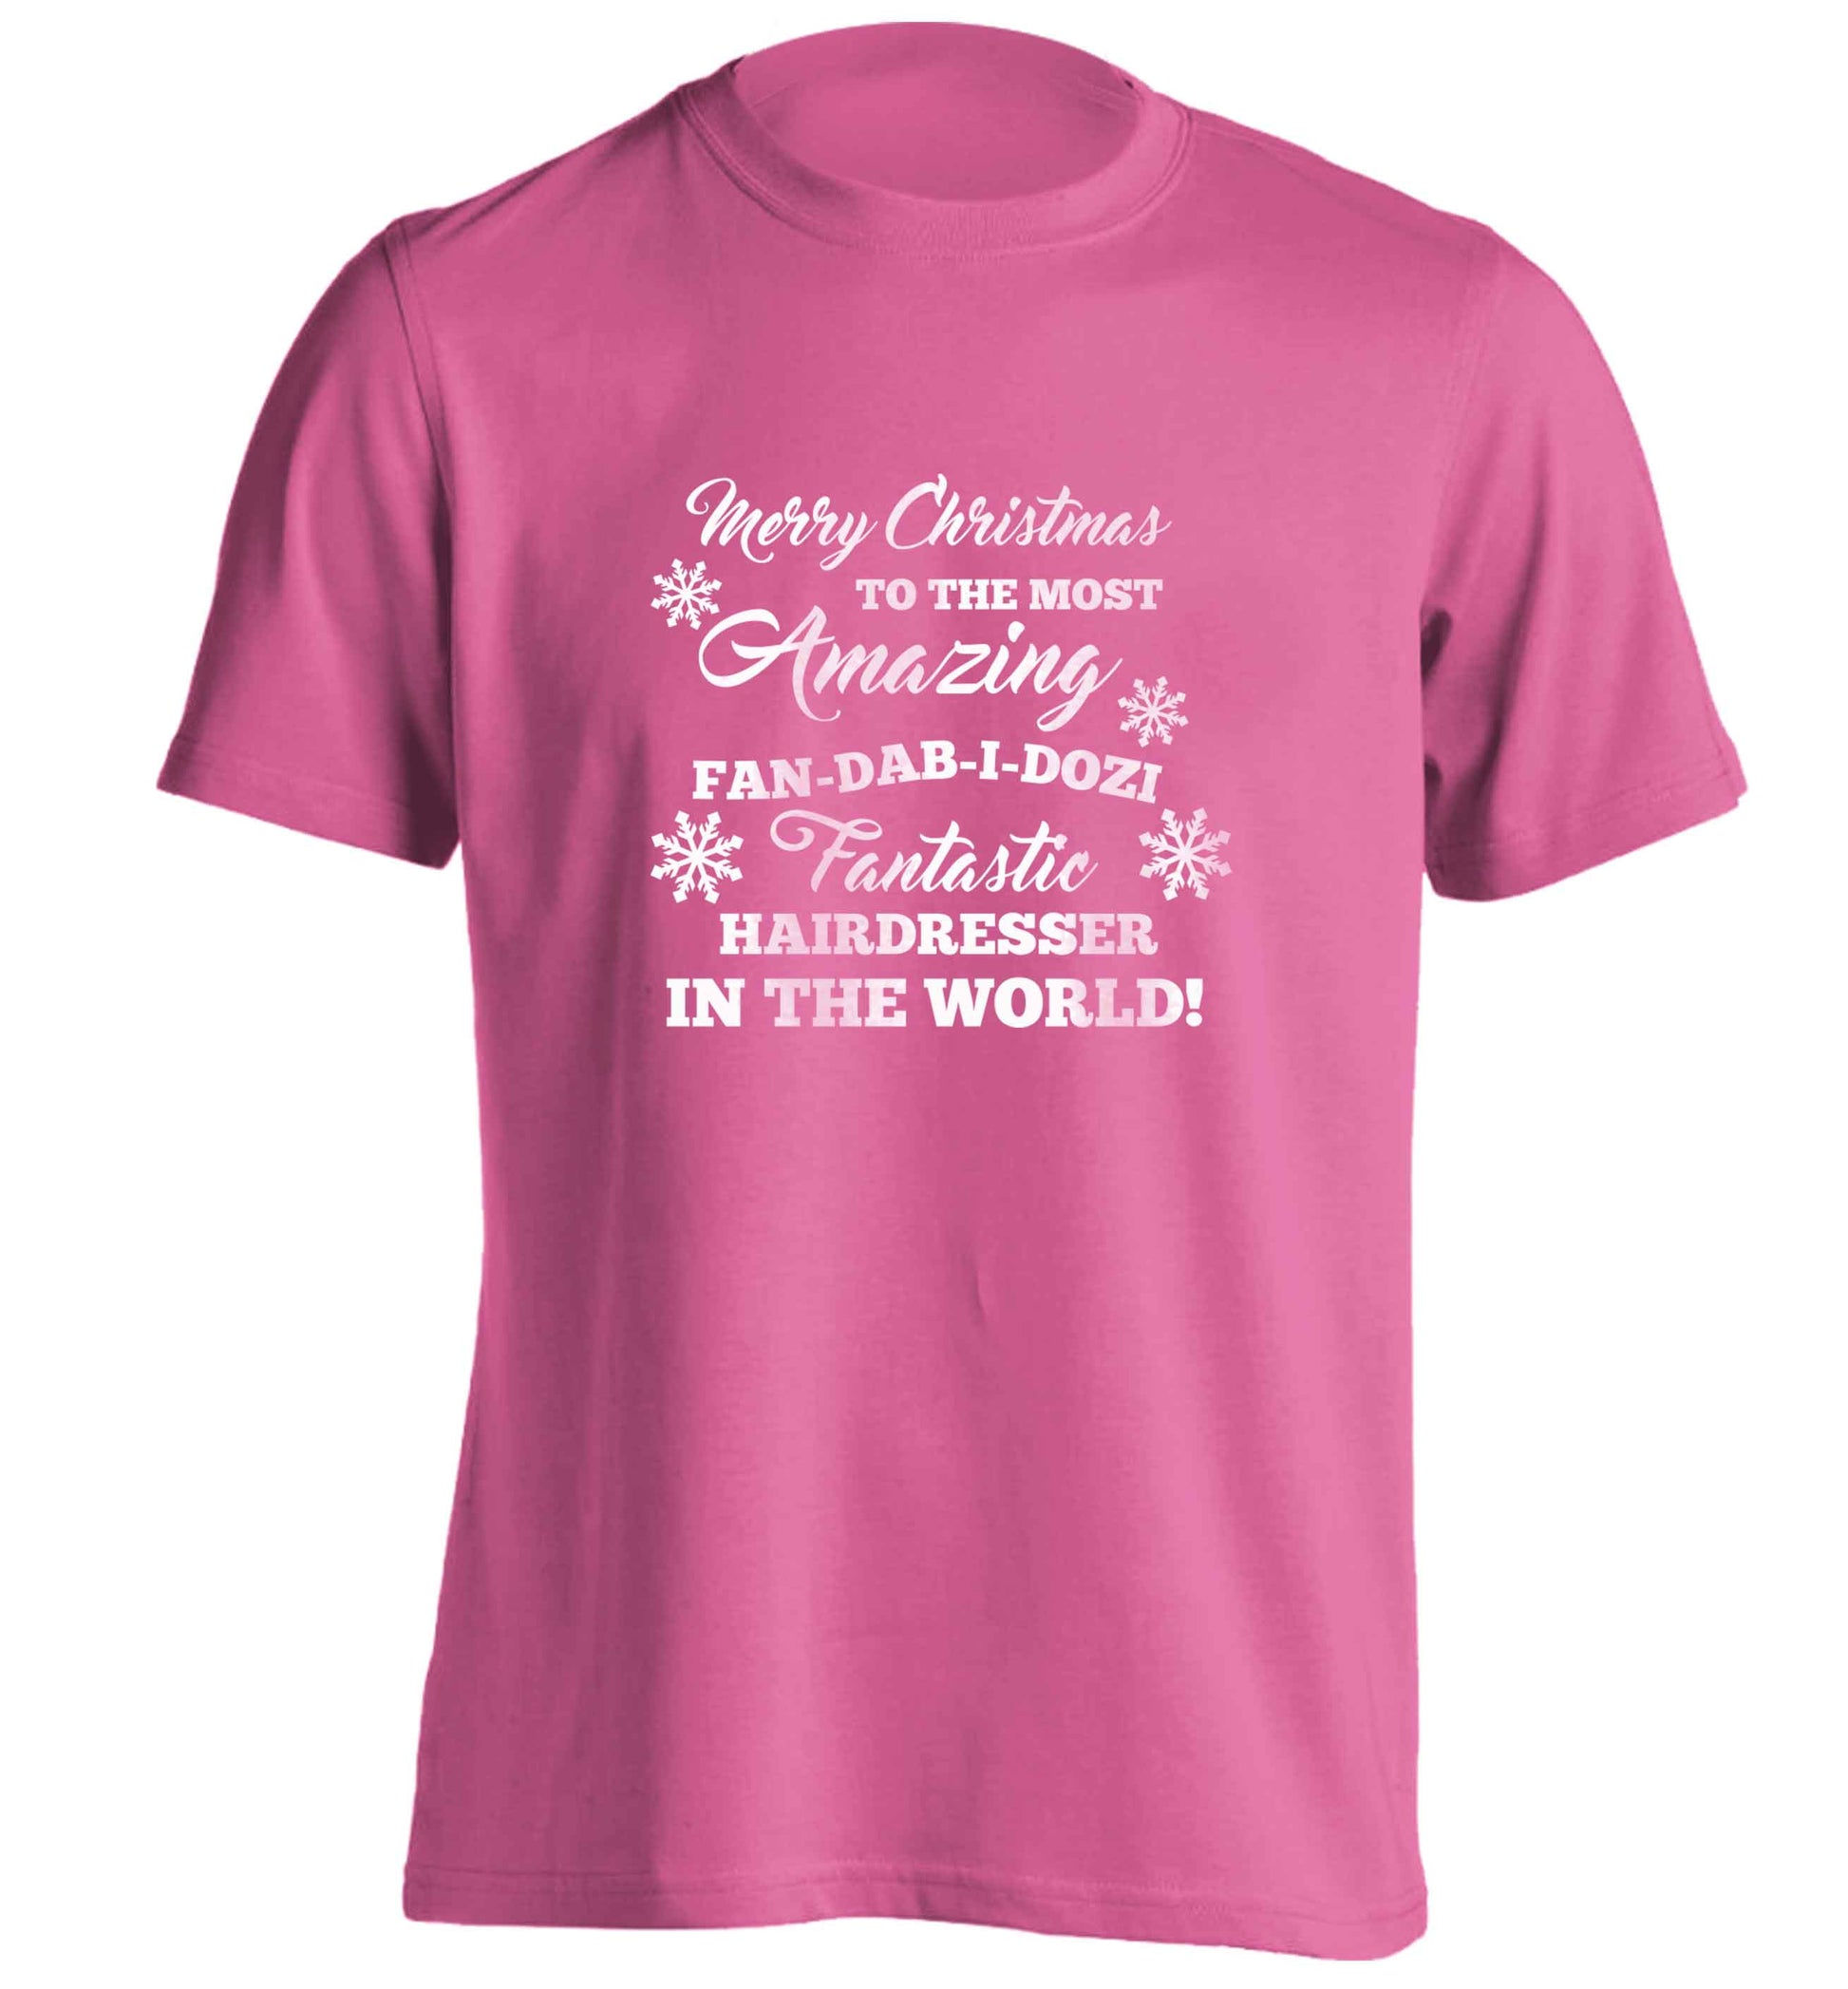 Merry Christmas to the most amazing dental assistant in the world! adults unisex pink Tshirt 2XL